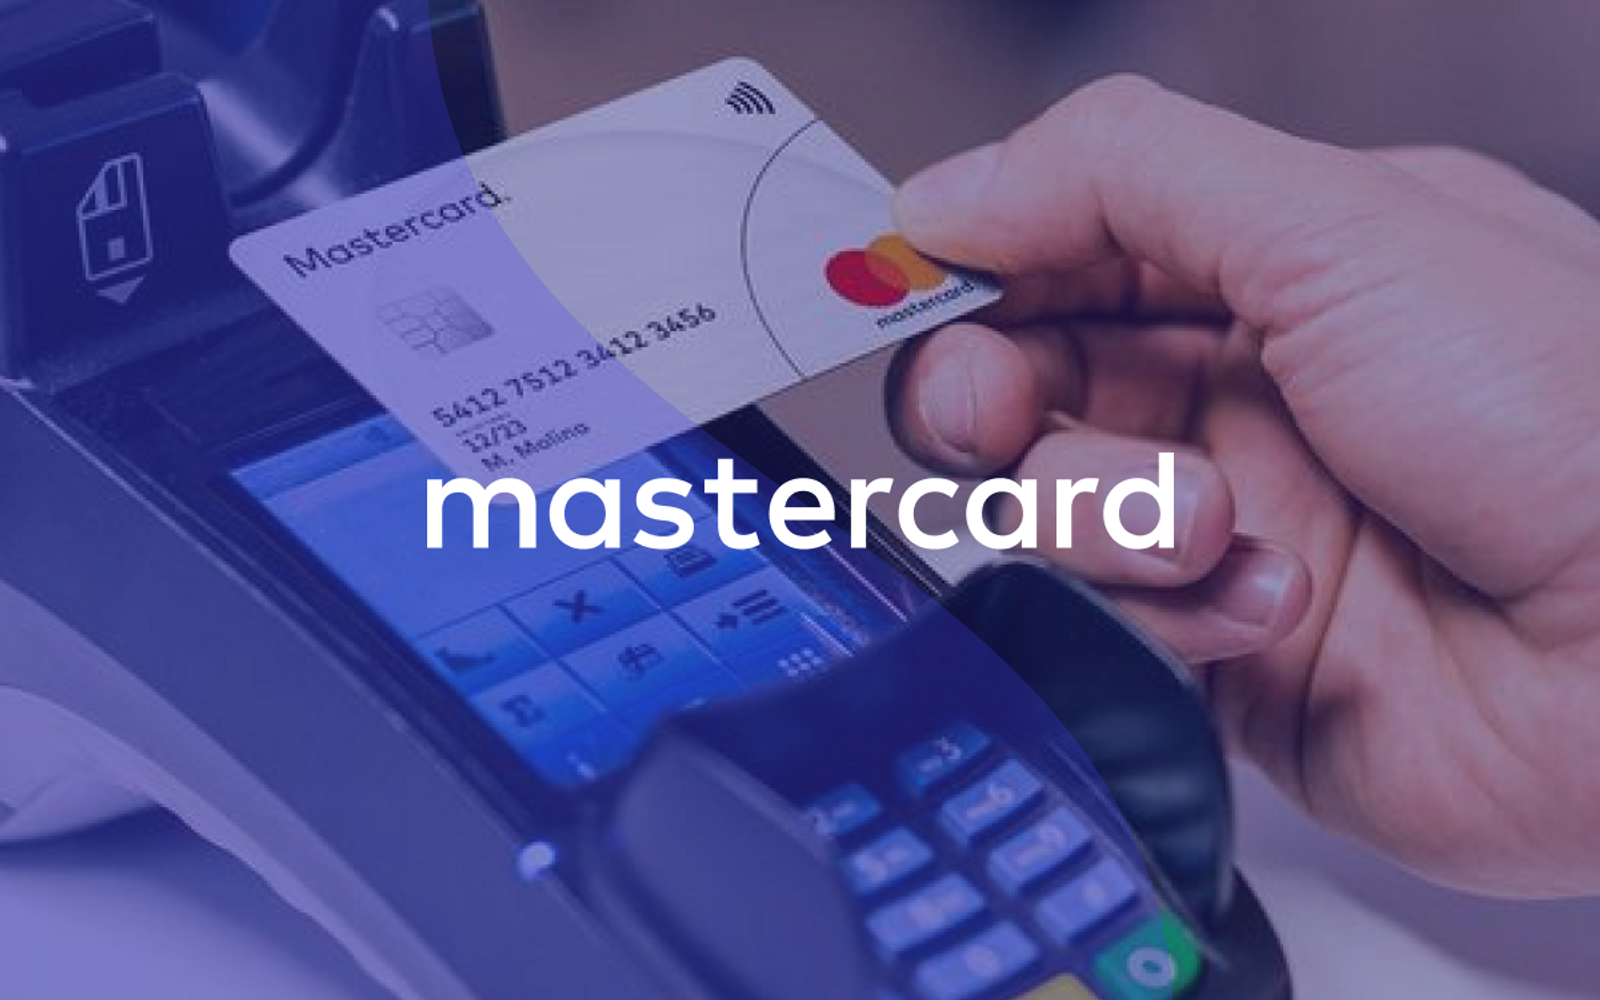 A hand paying something with a credit card, with blue transparent overlay and the Mastercard logo over it